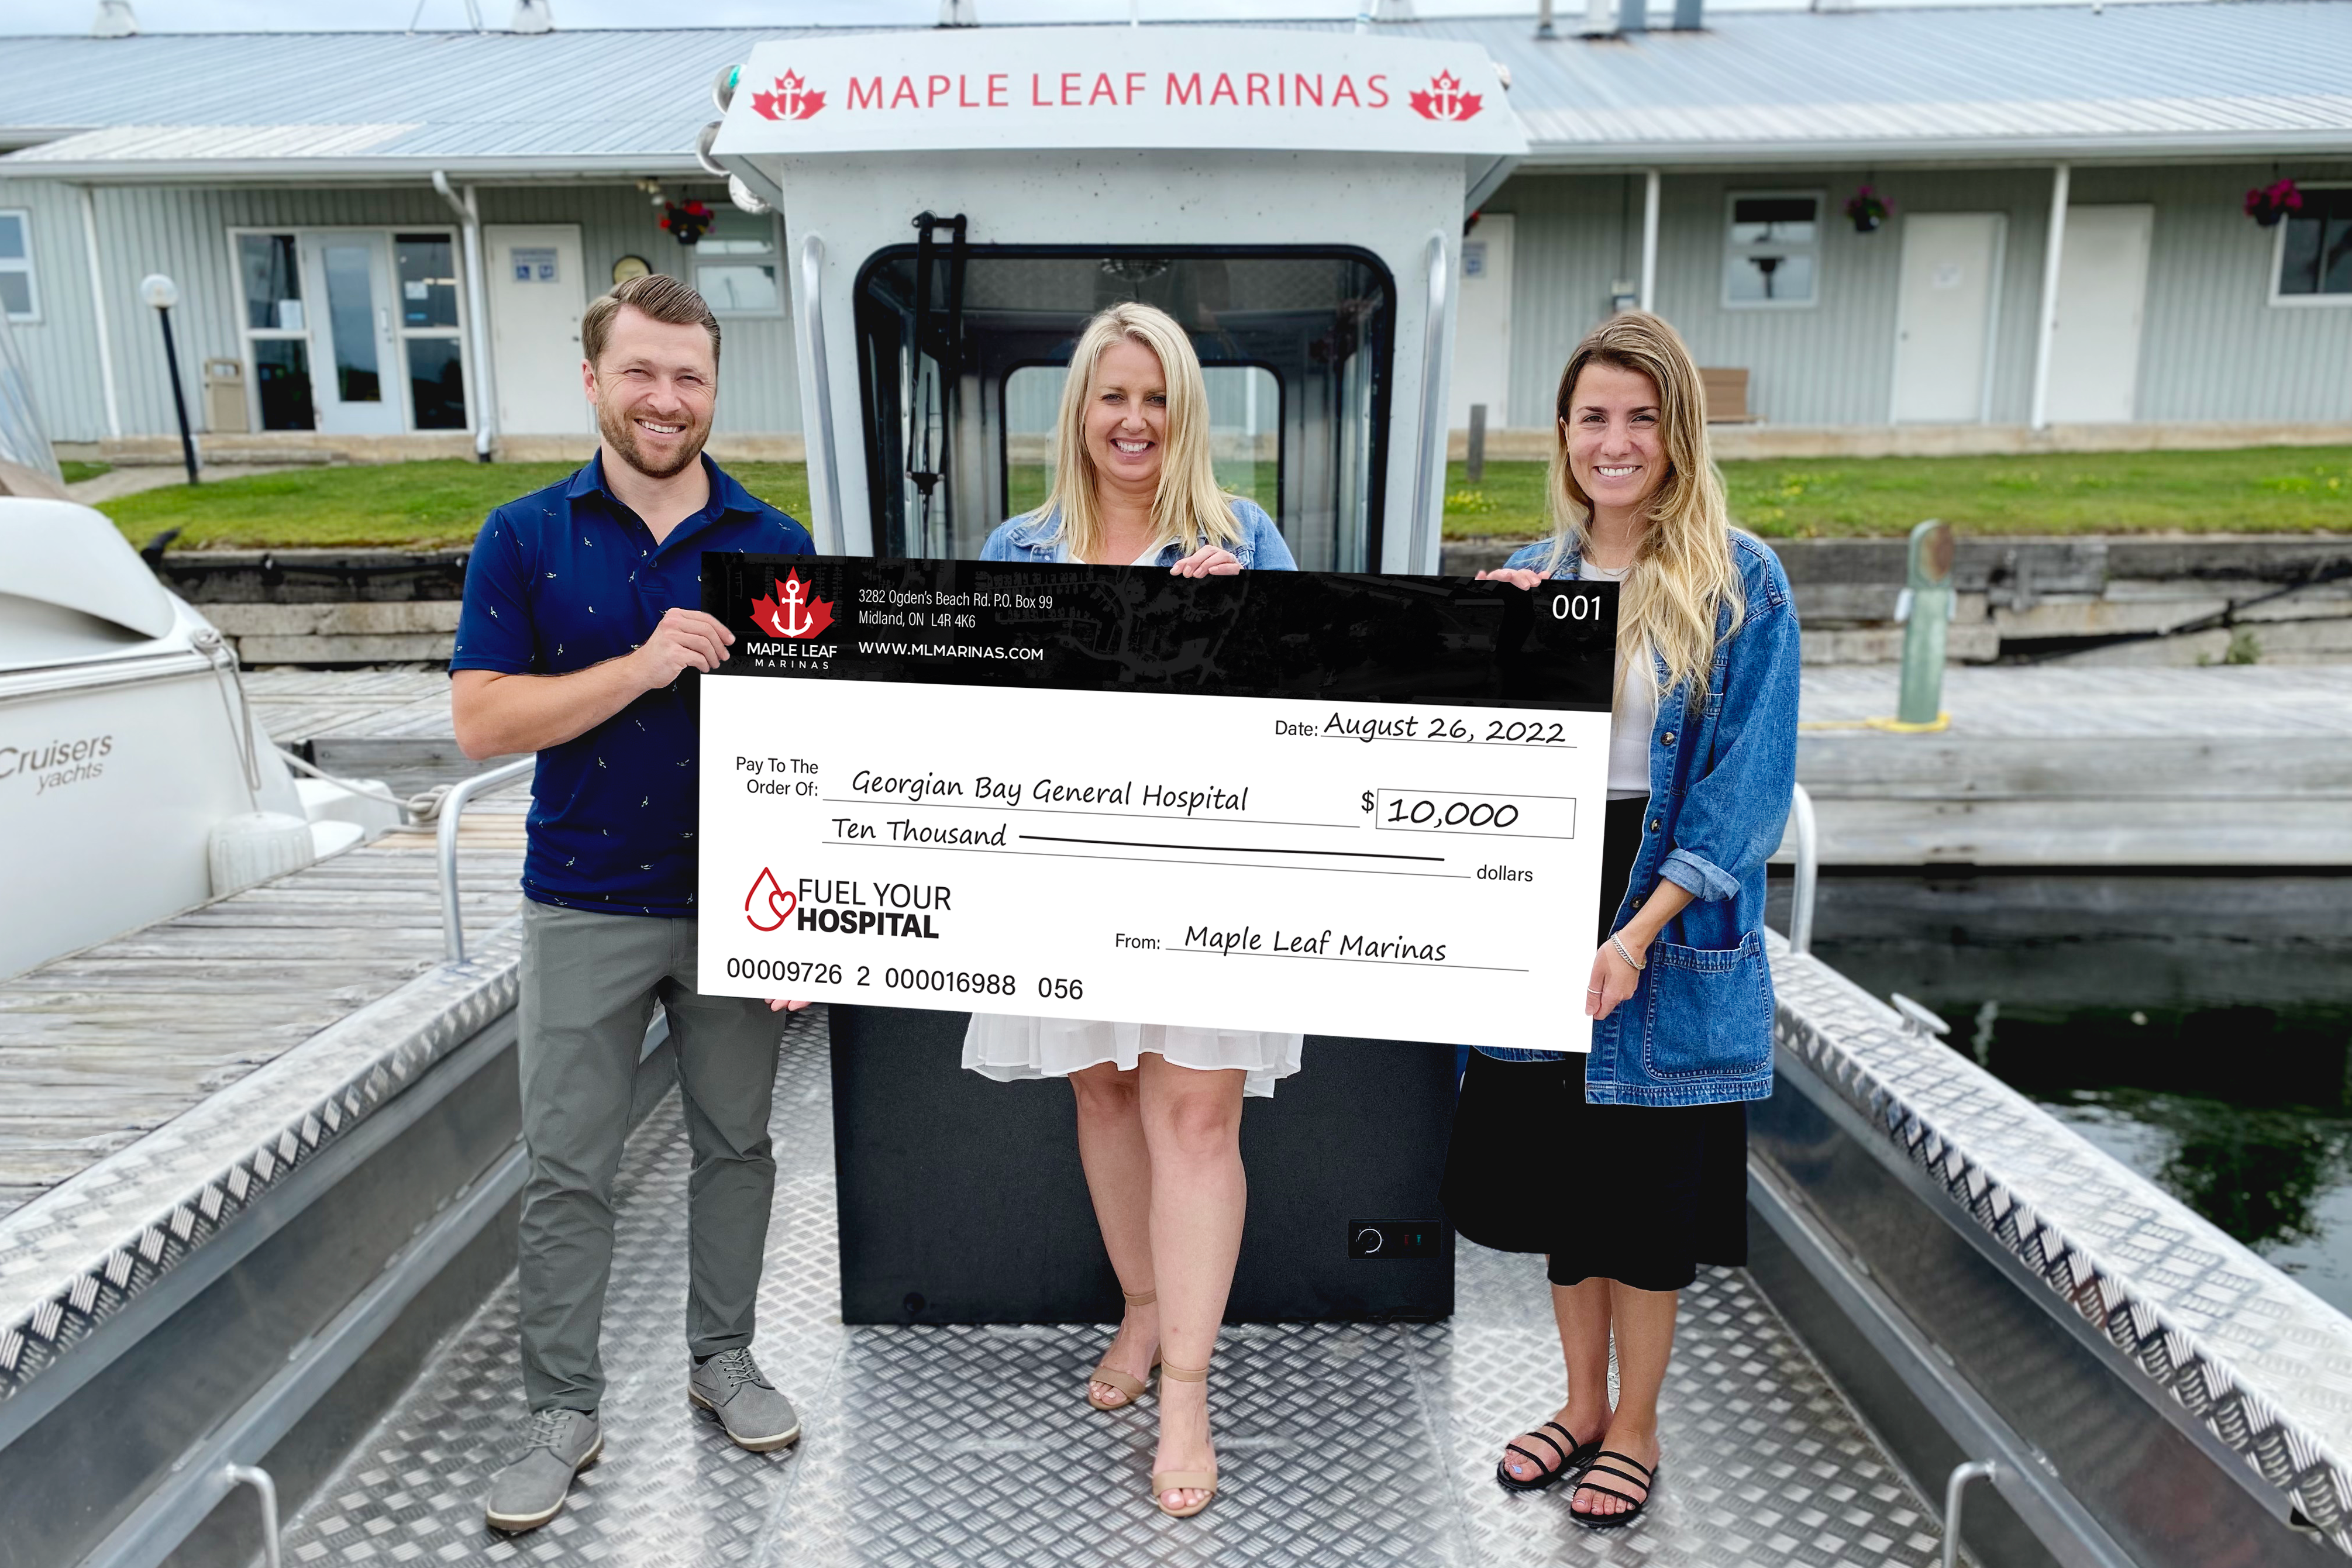 A man and two woman hold a giant cheque for $10,000 for GBGH from Maple Leaf Marinas